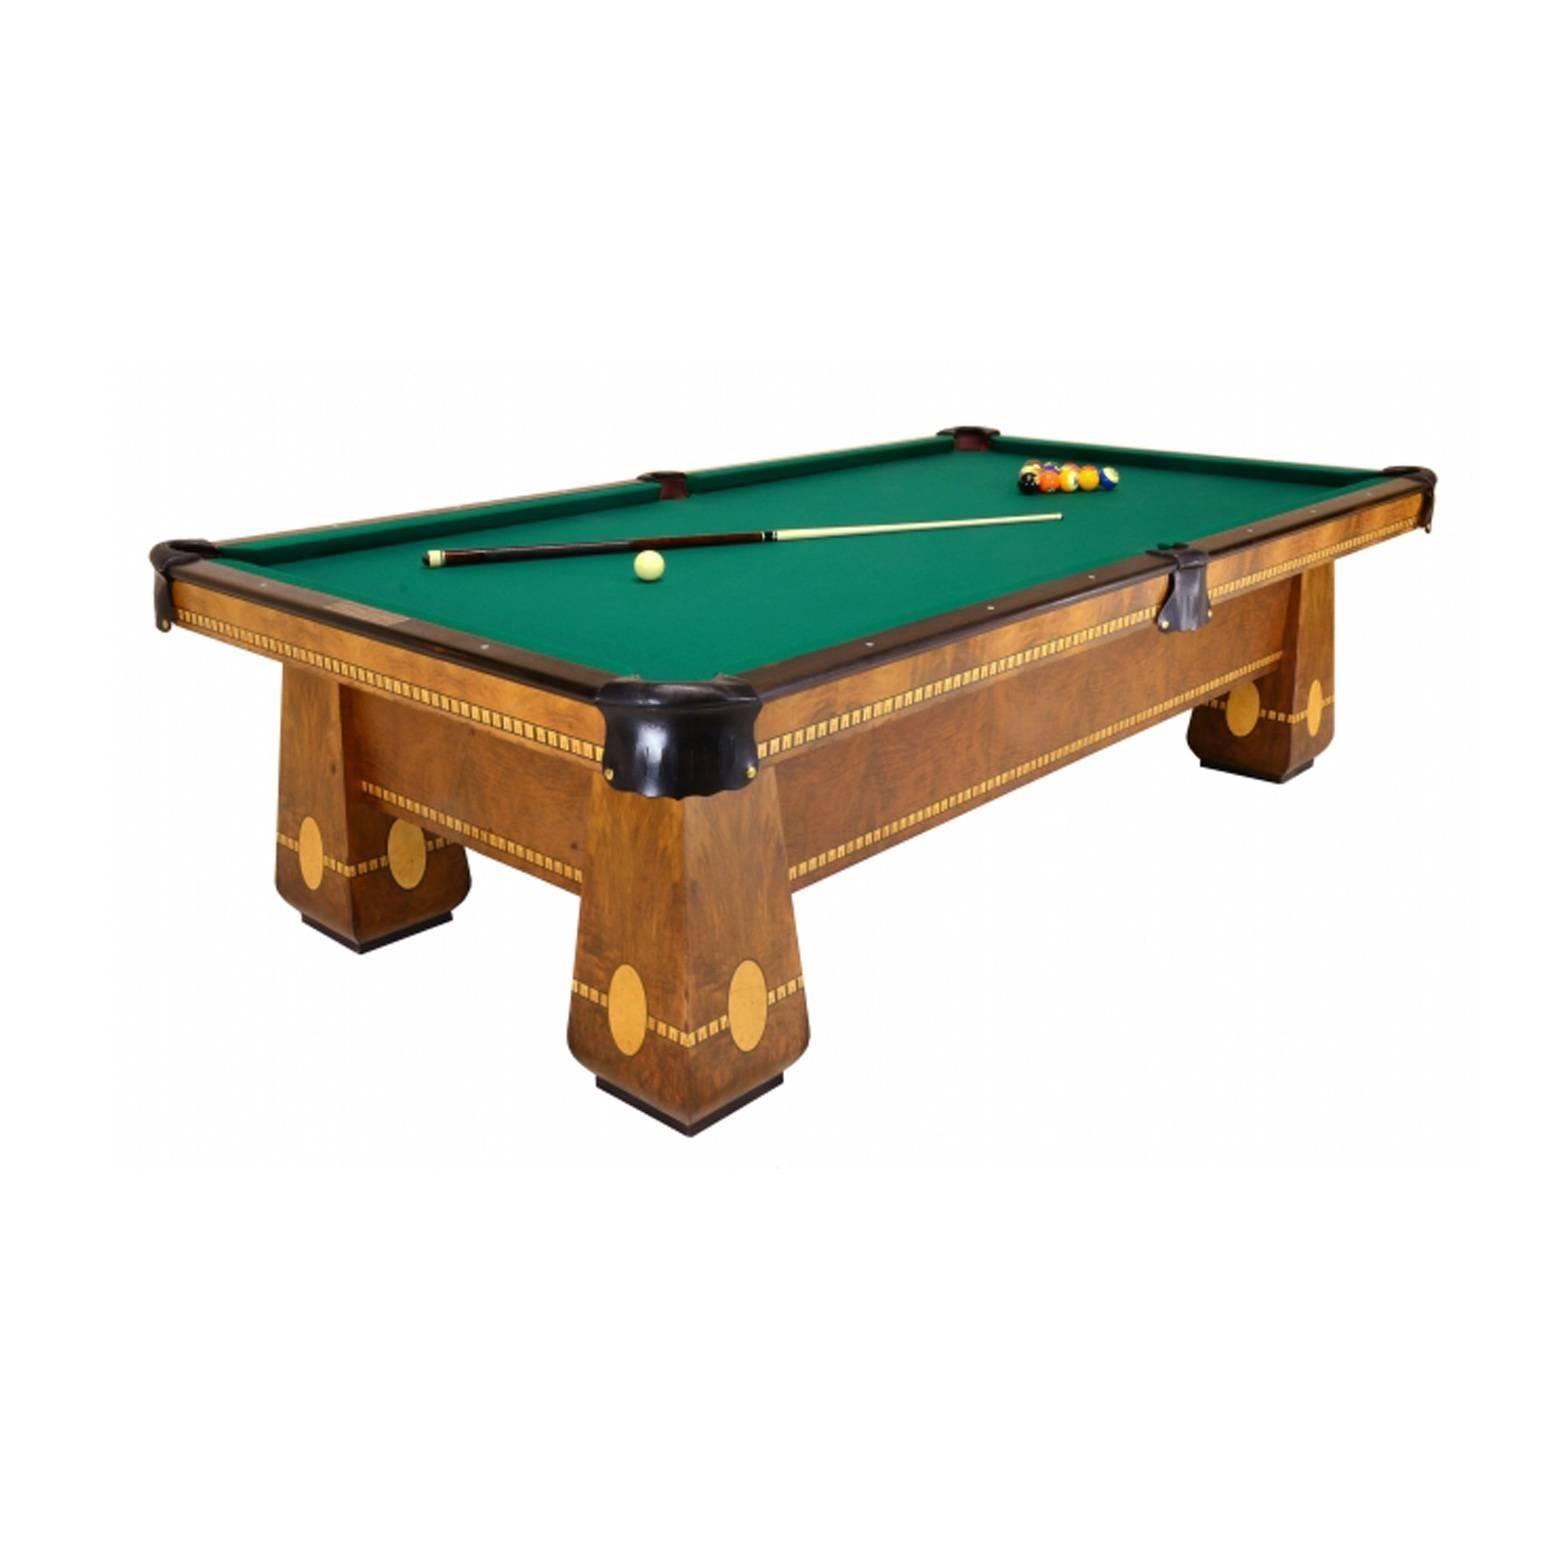 Has ball return, four legs, 60 inches x 100 inches playing area.
Good, restored condition. At Blatt Billiards.
Buyer must inspect, no returns. Arts and crafts style. Will be delivered by Blatt Billiards, buyer to make arrangements. Purchase includes